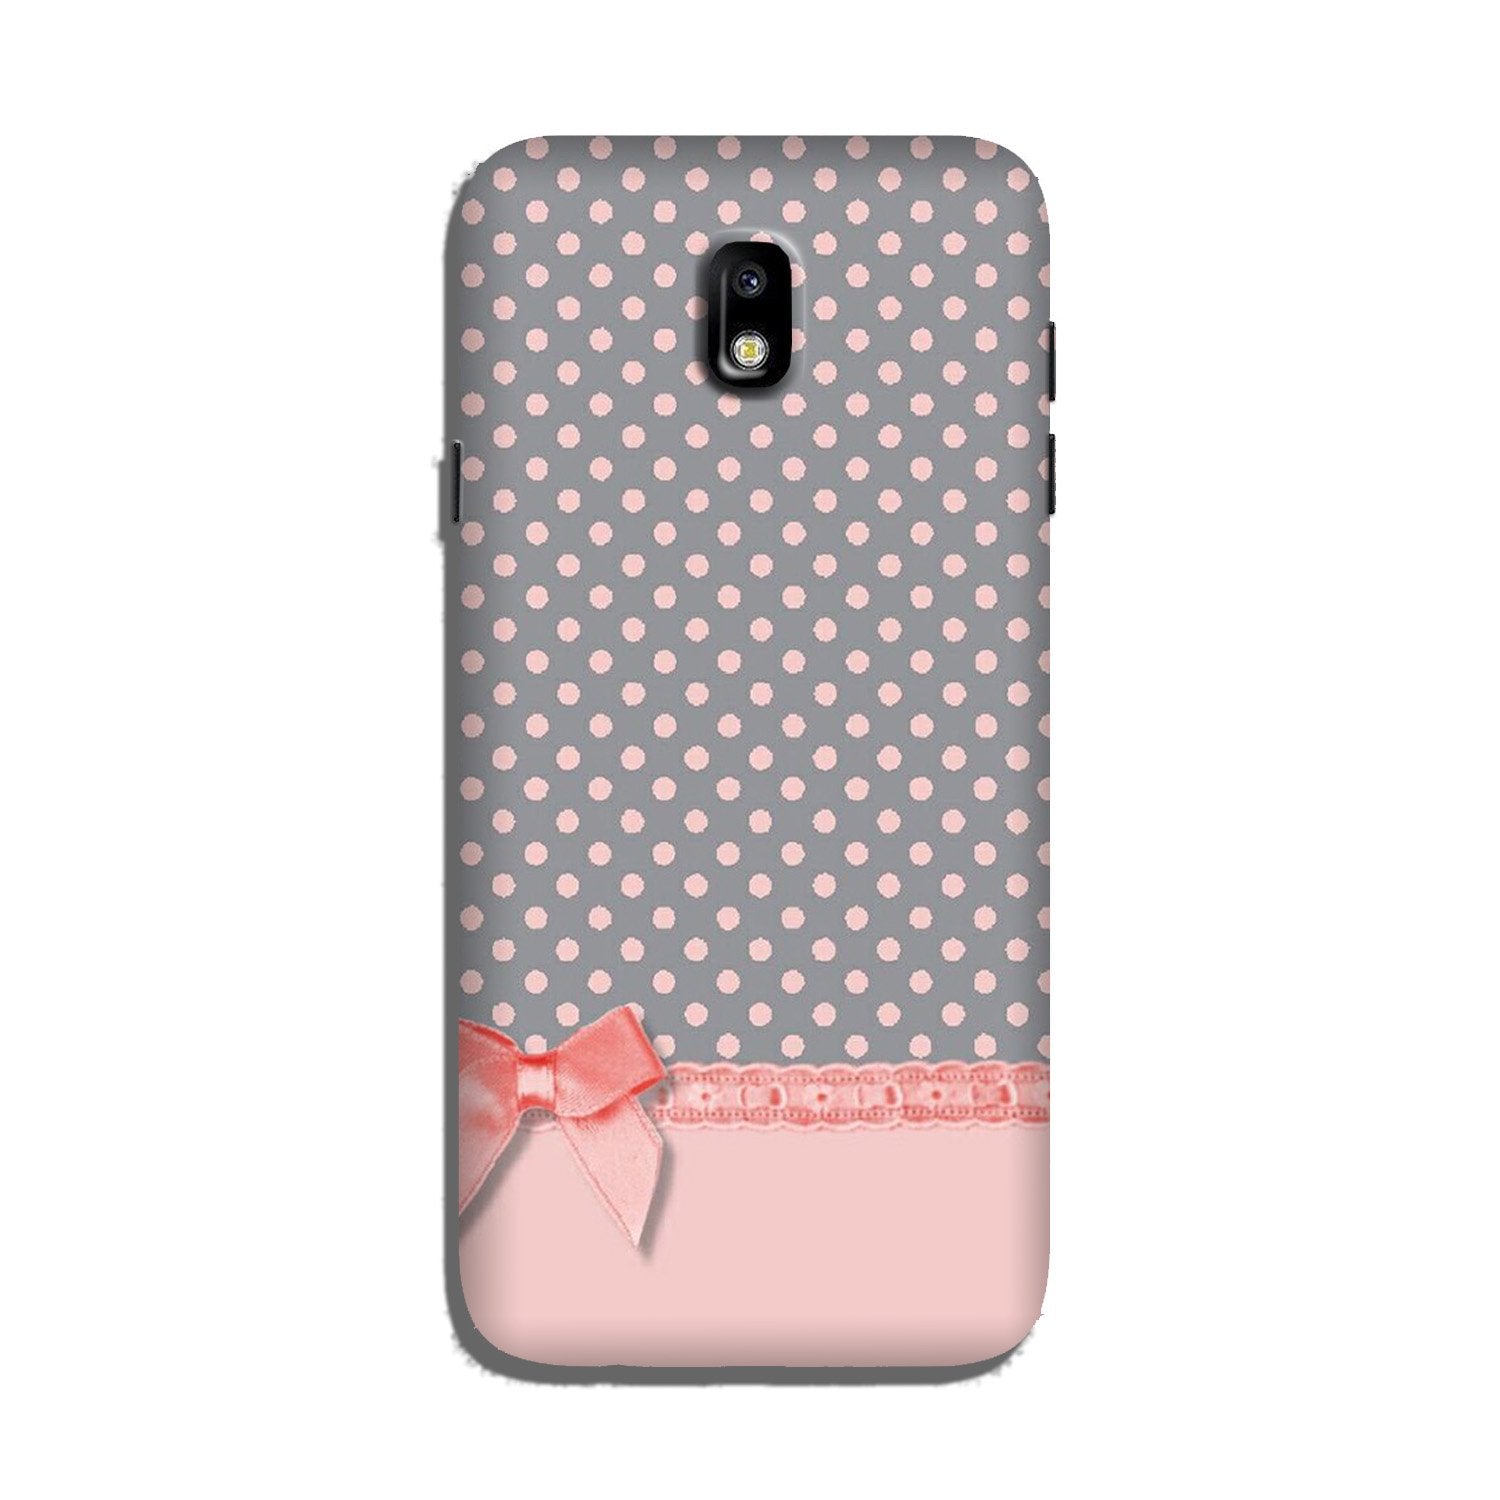 Gift Wrap2 Case for Galaxy J5 Pro